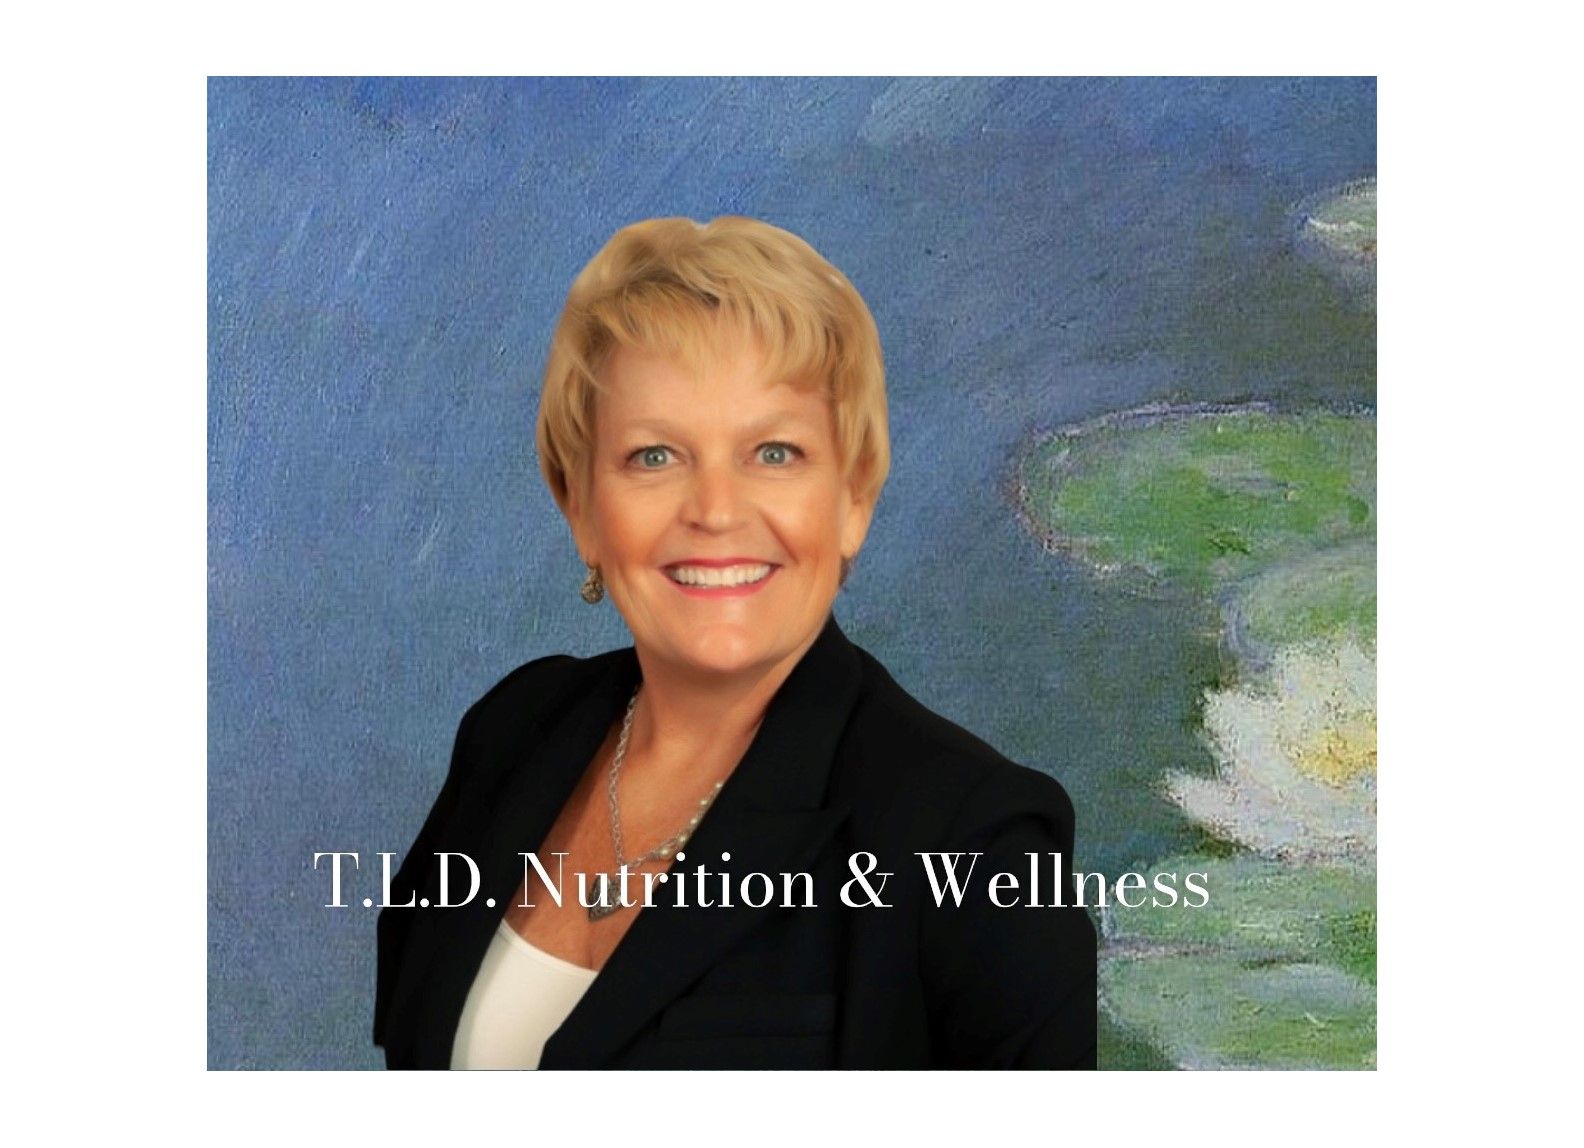 Habits & Lifestyle Choices - TLD Nutrition and Wellness